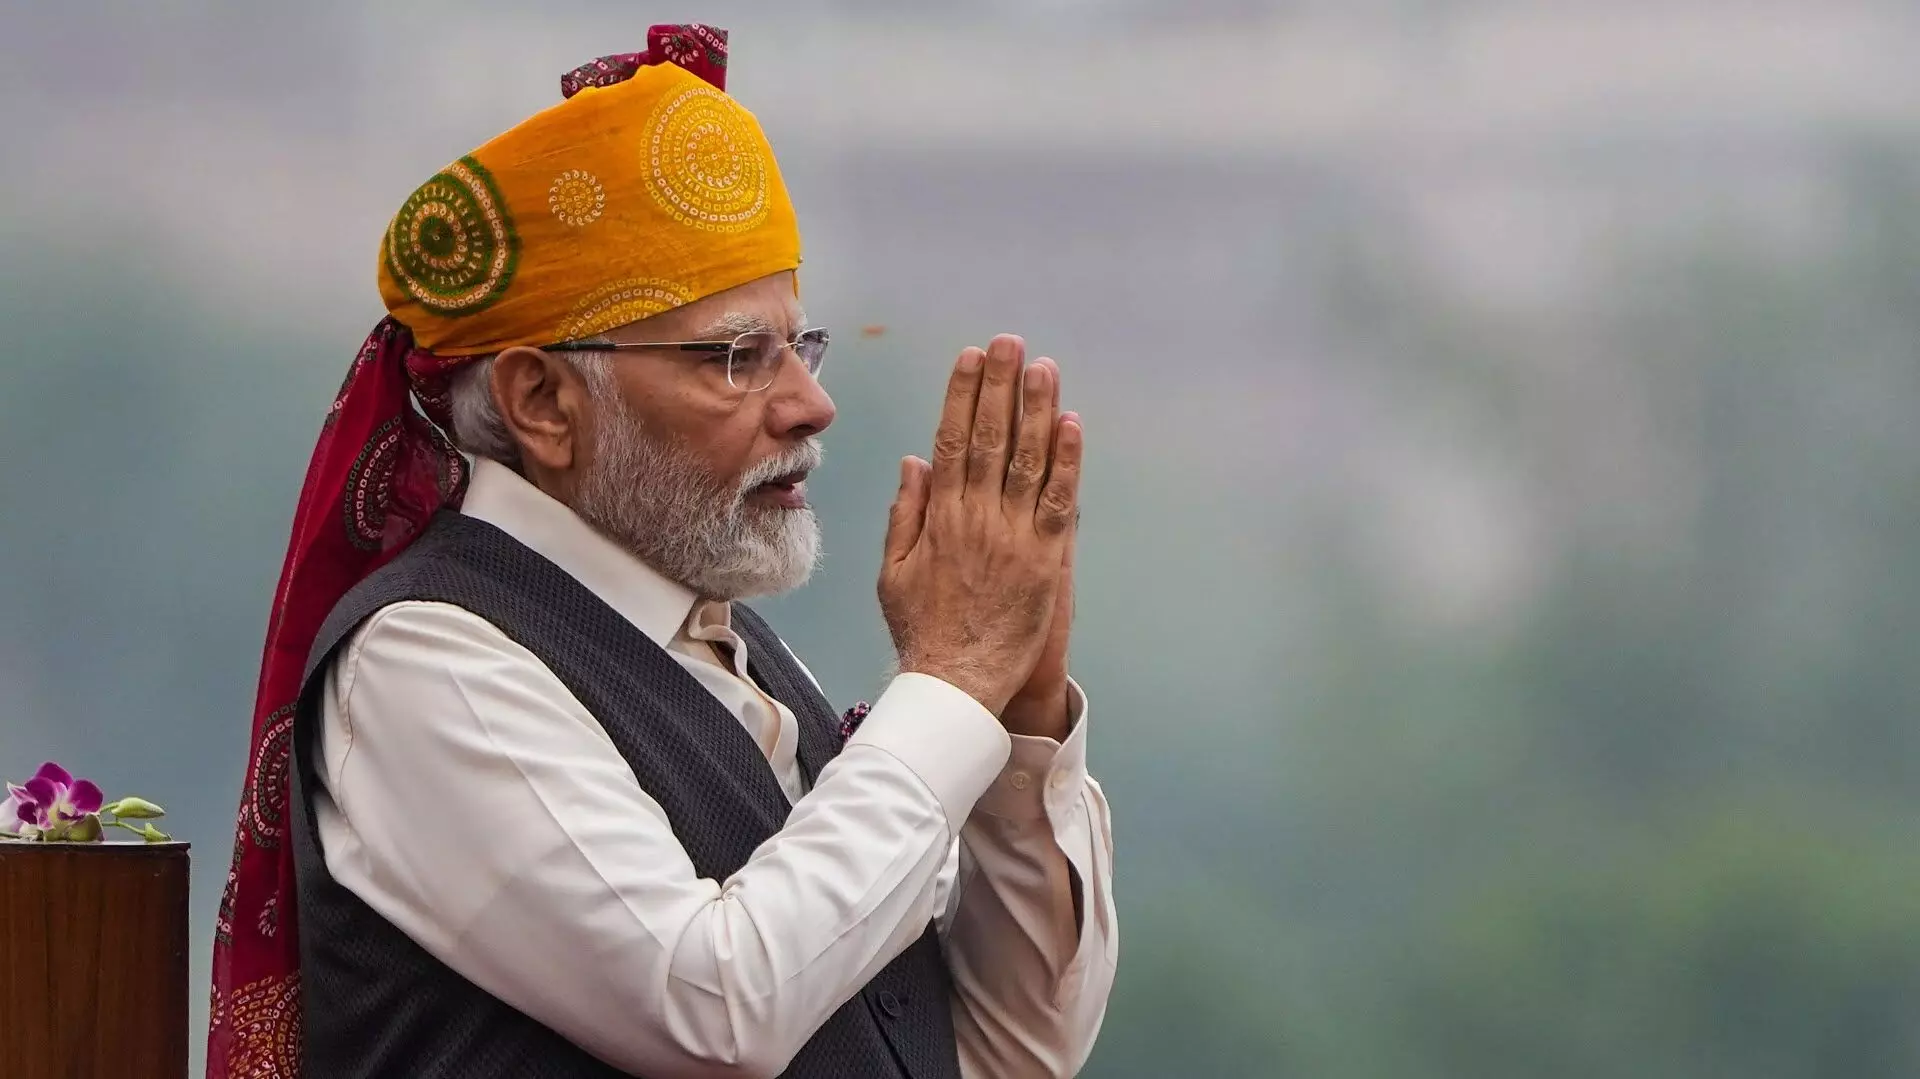 PM Modi vows to address nation from Red Fort next year; sets tone for 2024 election